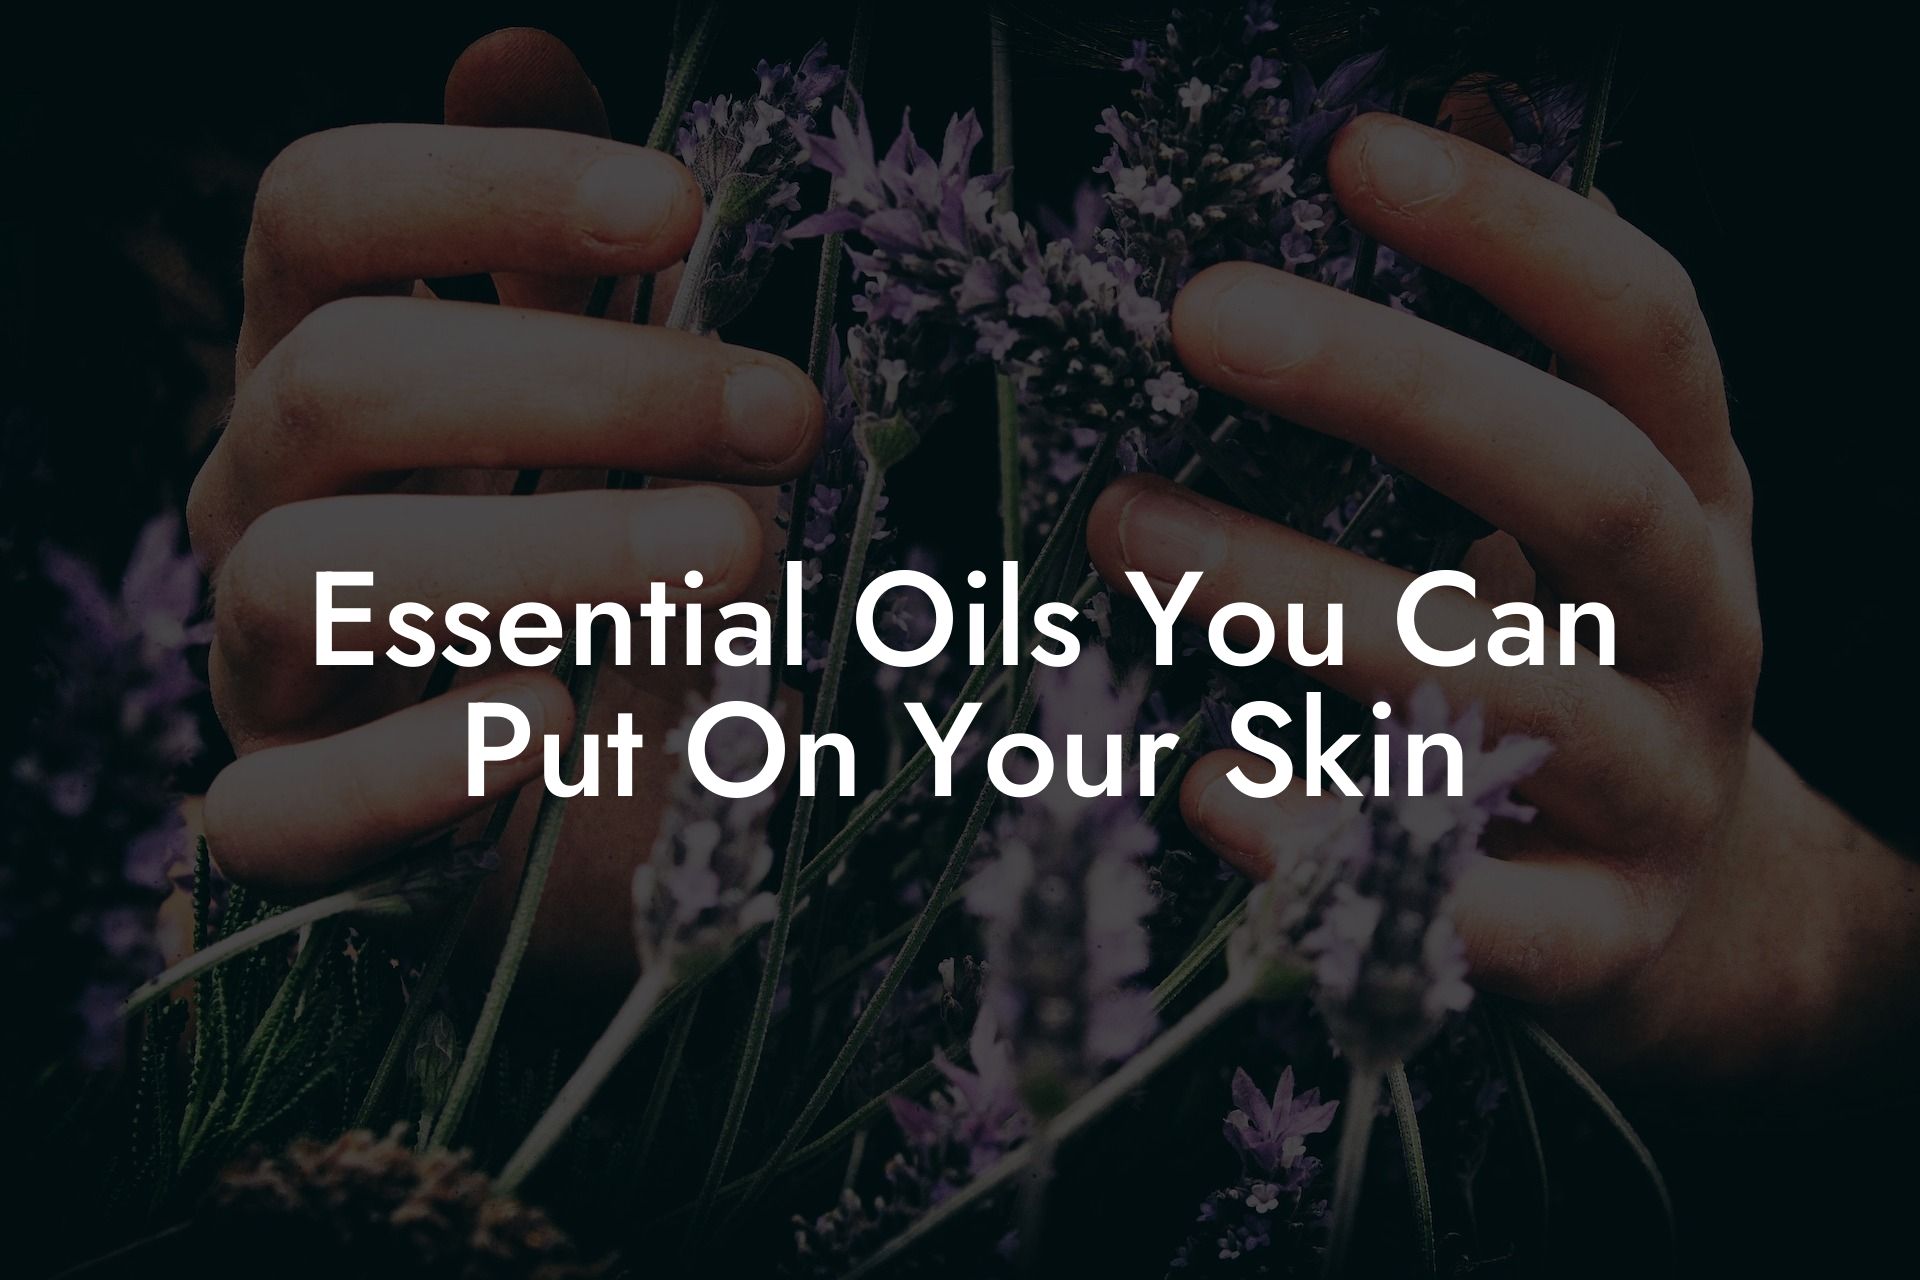 Essential Oils You Can Put On Your Skin